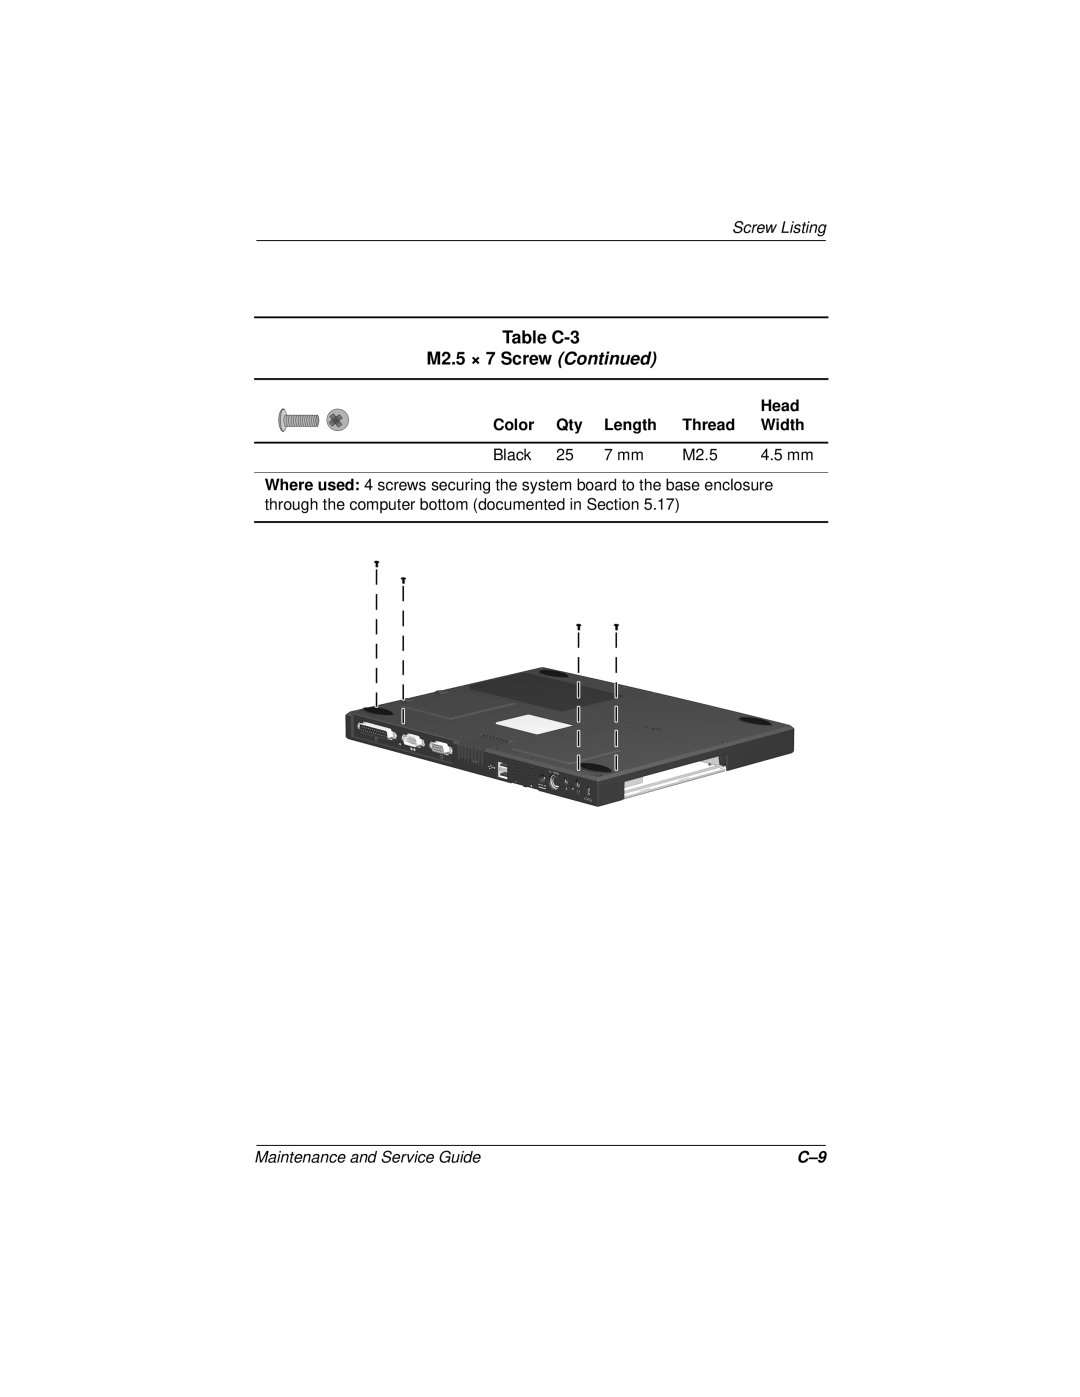 Compaq N110 manual Table C-3 M2.5 × 7 Screw Continued, Screw Listing, Maintenance and Service Guide 